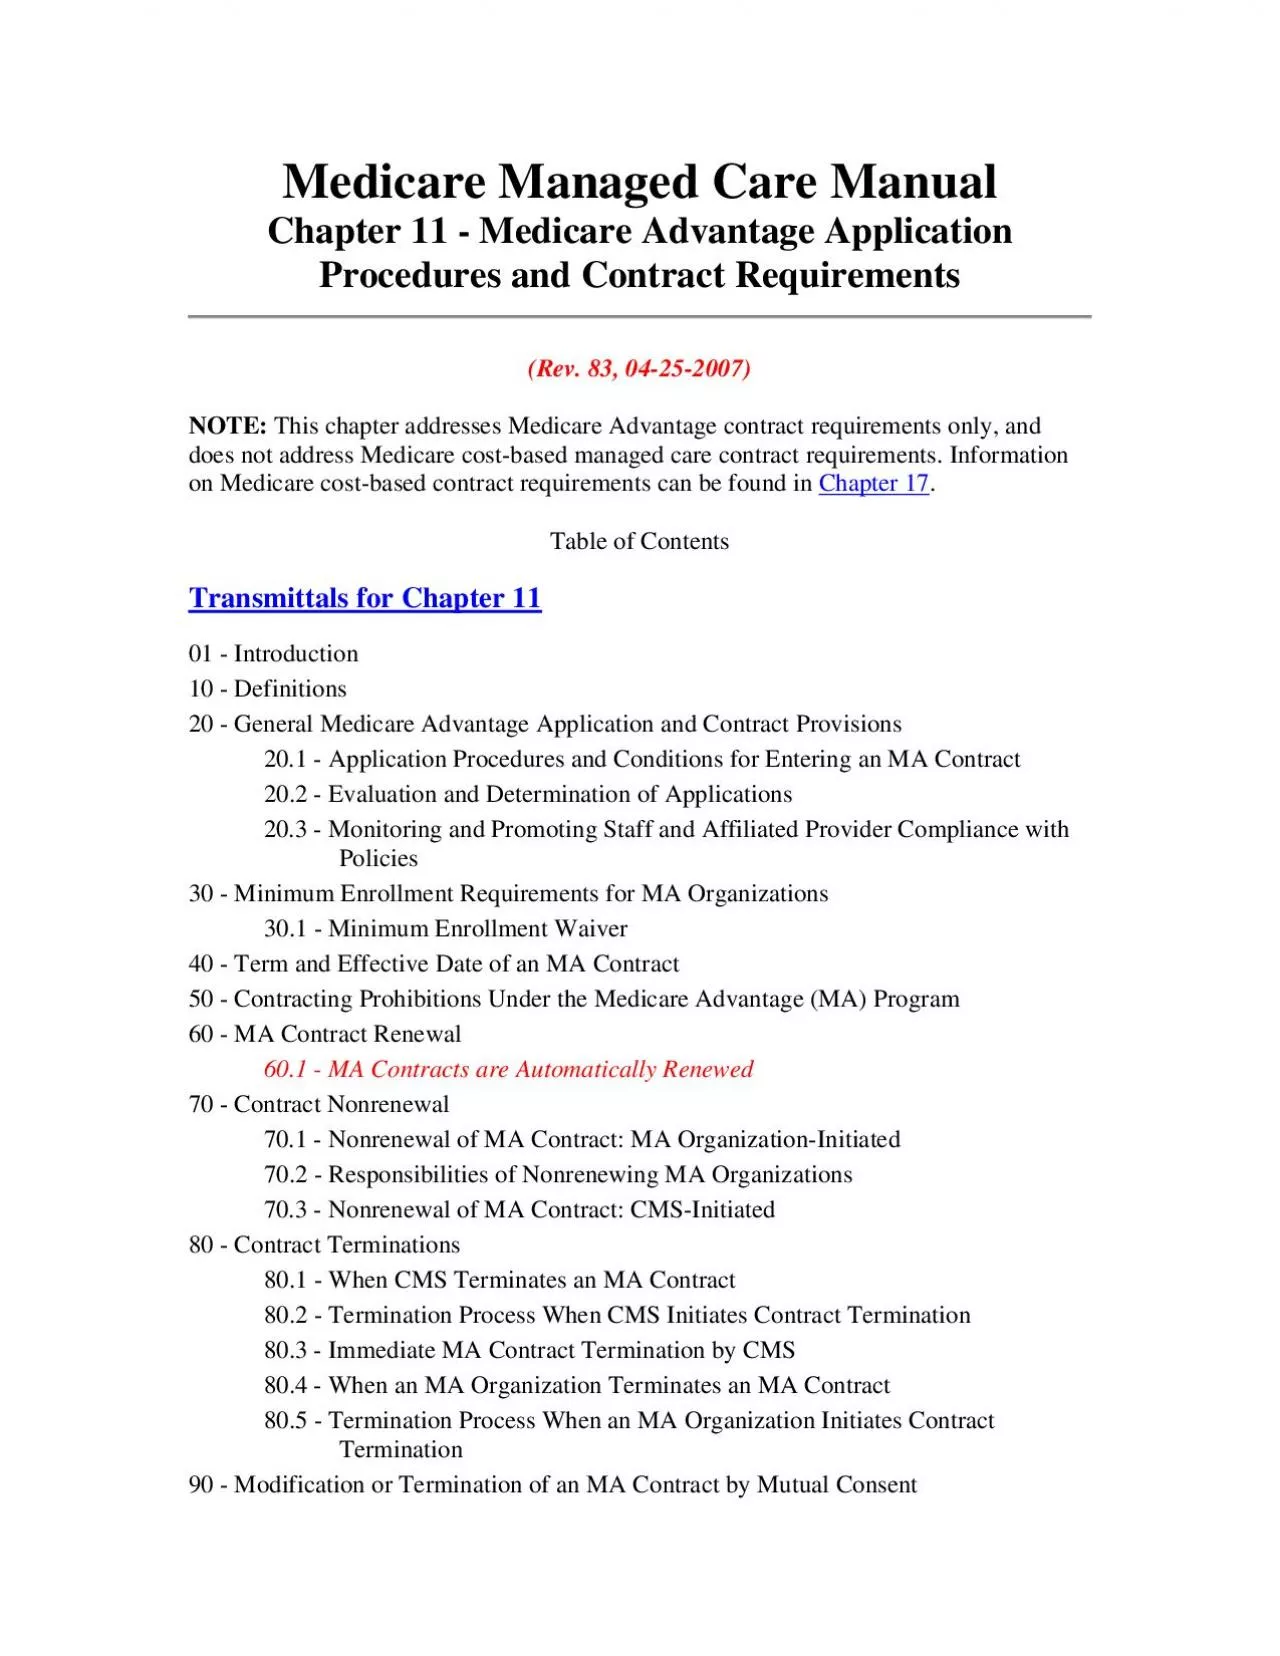 202  Evaluation and Determination of Applications